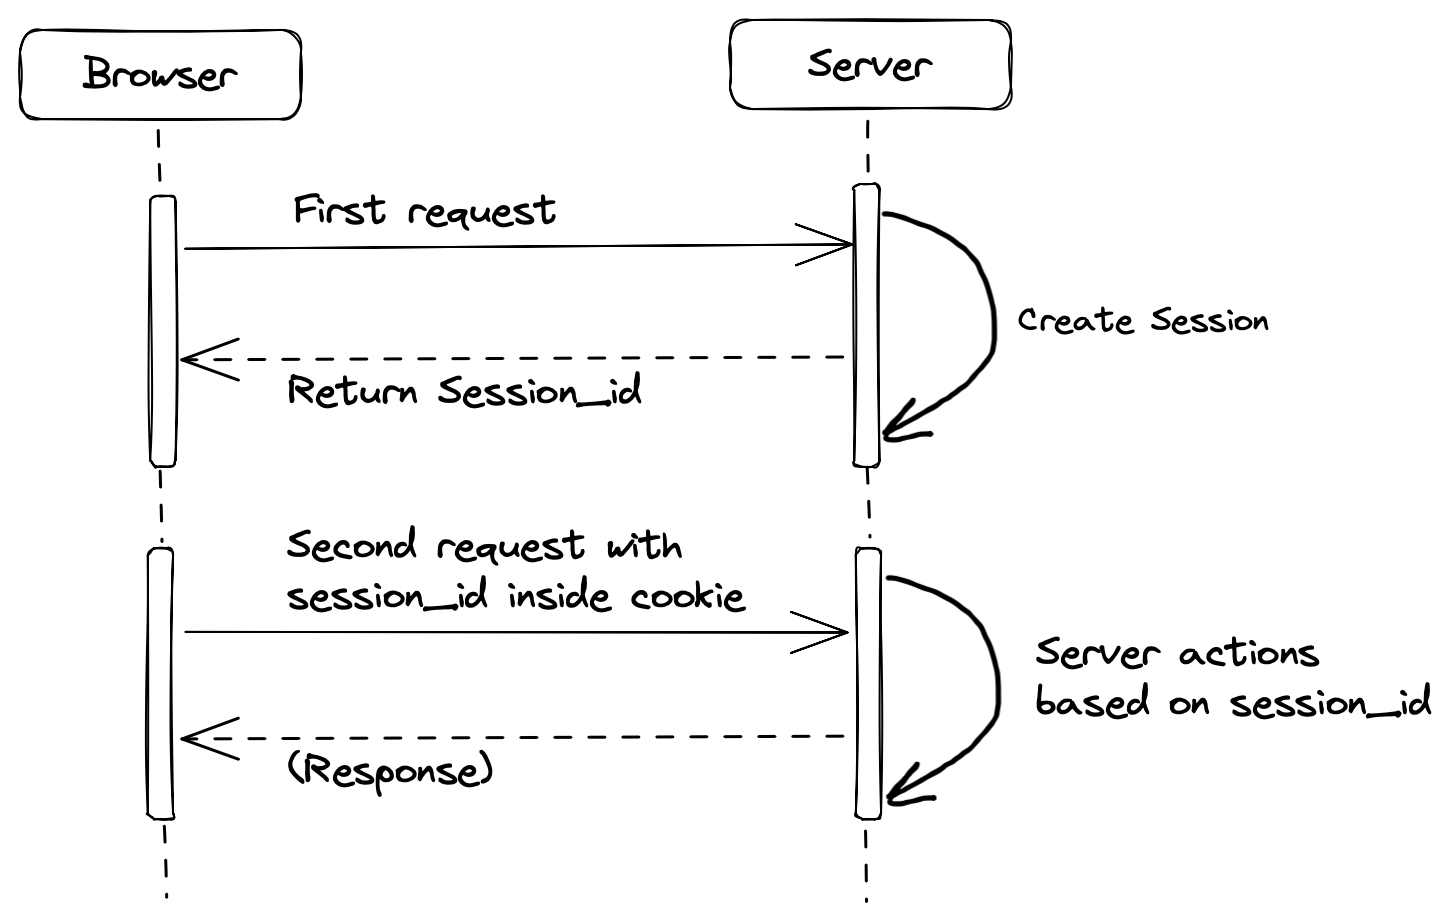 How browser and server handle session